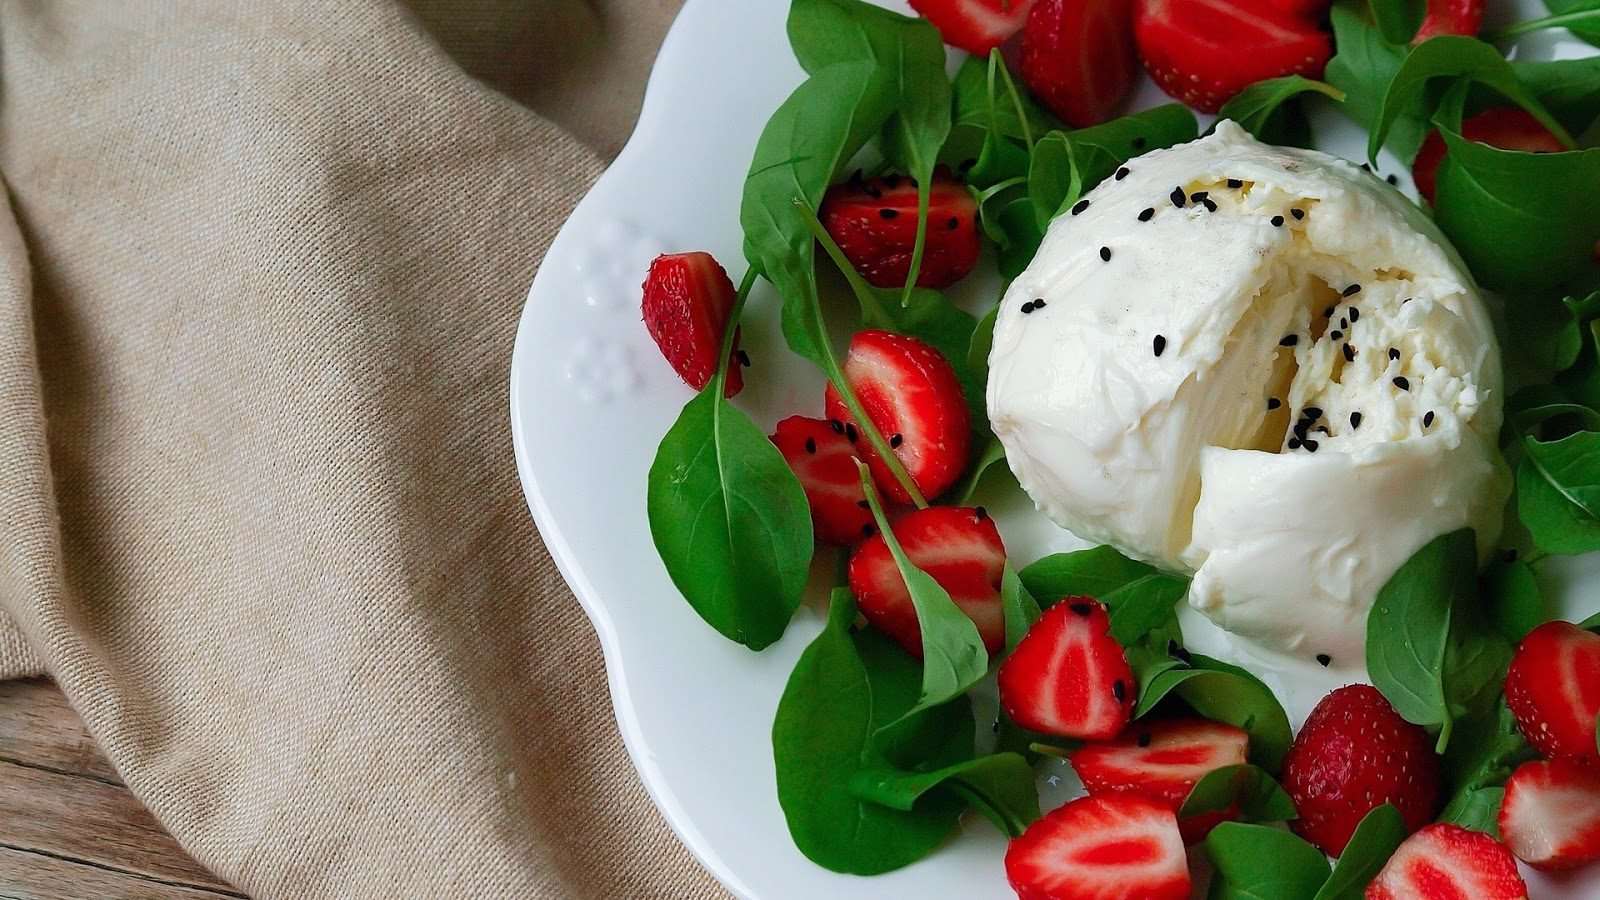 Burrata’s uniqueness lies in its soft buttery centre, made from fresh cream and shredded mozzarella. Photo credit: Vallombrosa Cheese/Facebook